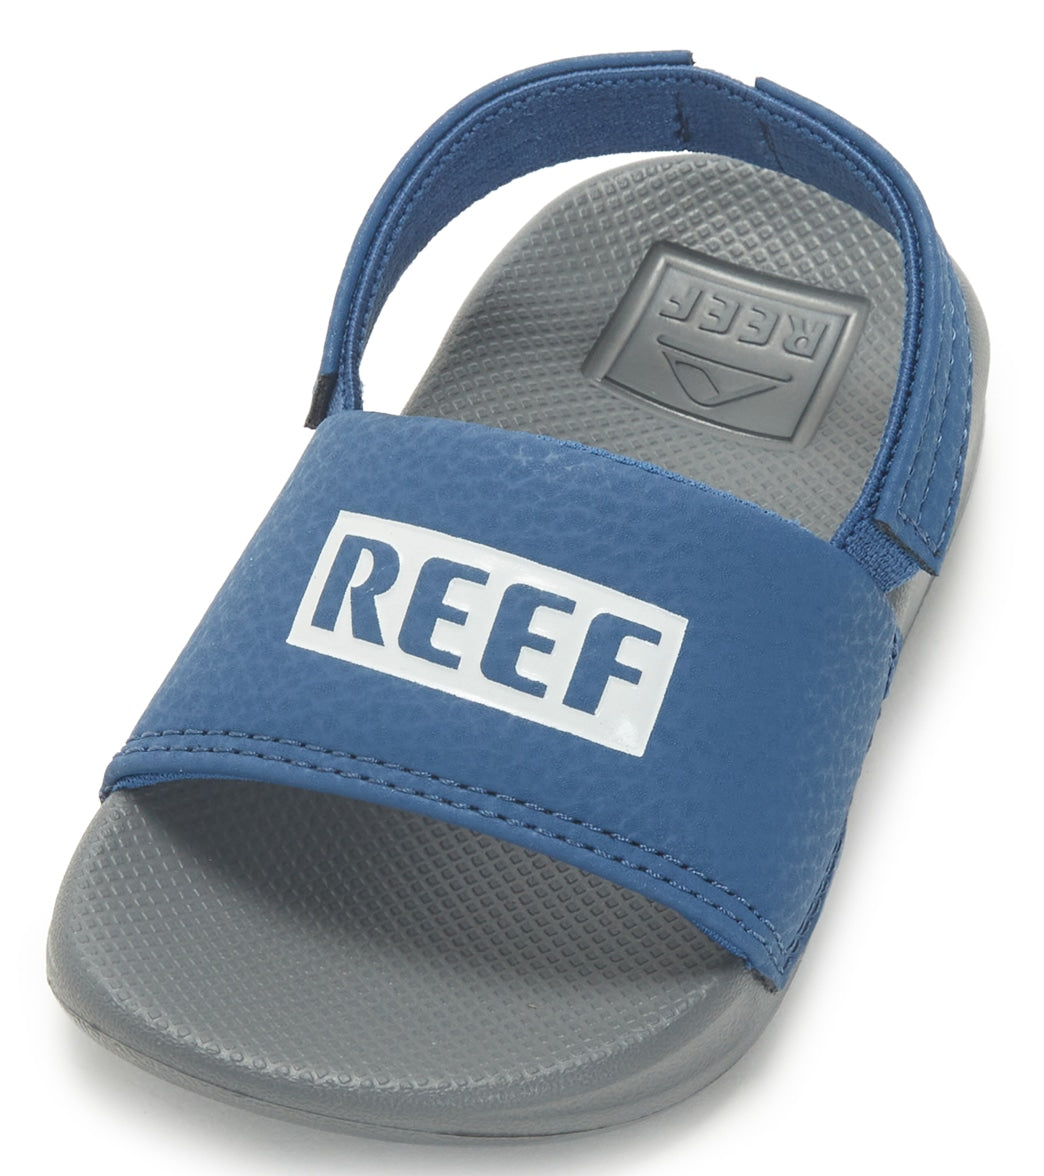 Reef Kids' Little One Slide Sandals (Baby, Toddler) at SwimOutlet.com